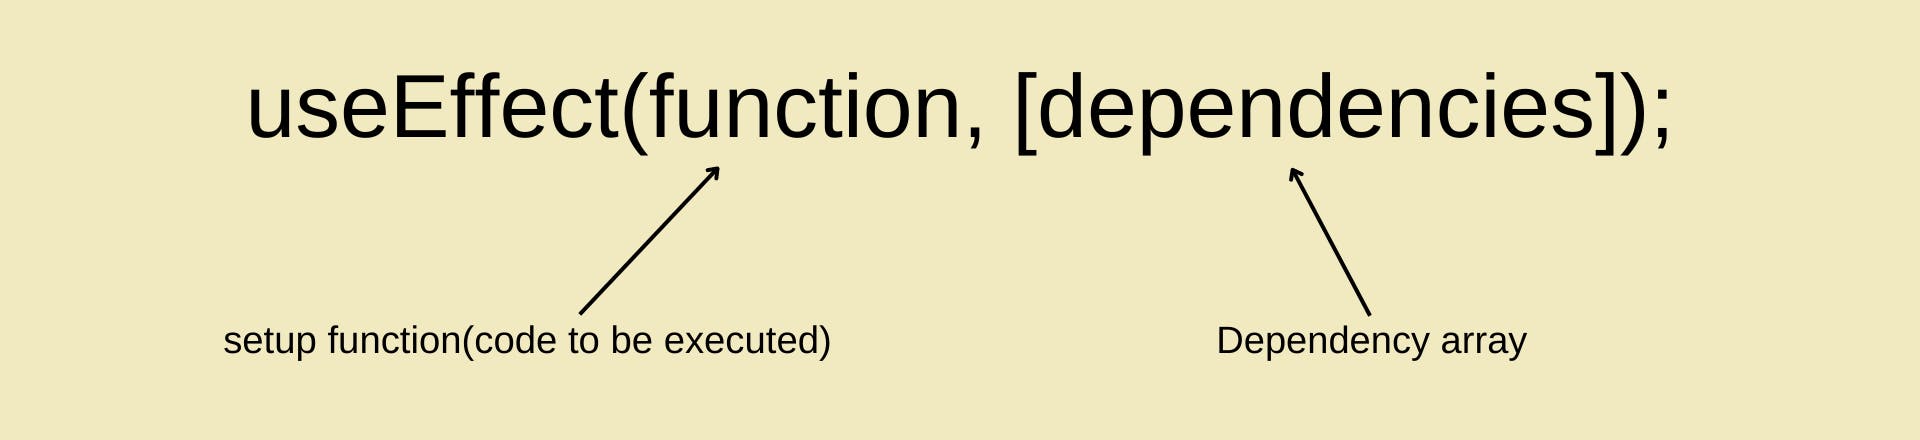 useEffect(function, [dependecies]), setupfunction(code to be executed inside useEffect) and dependecy array.